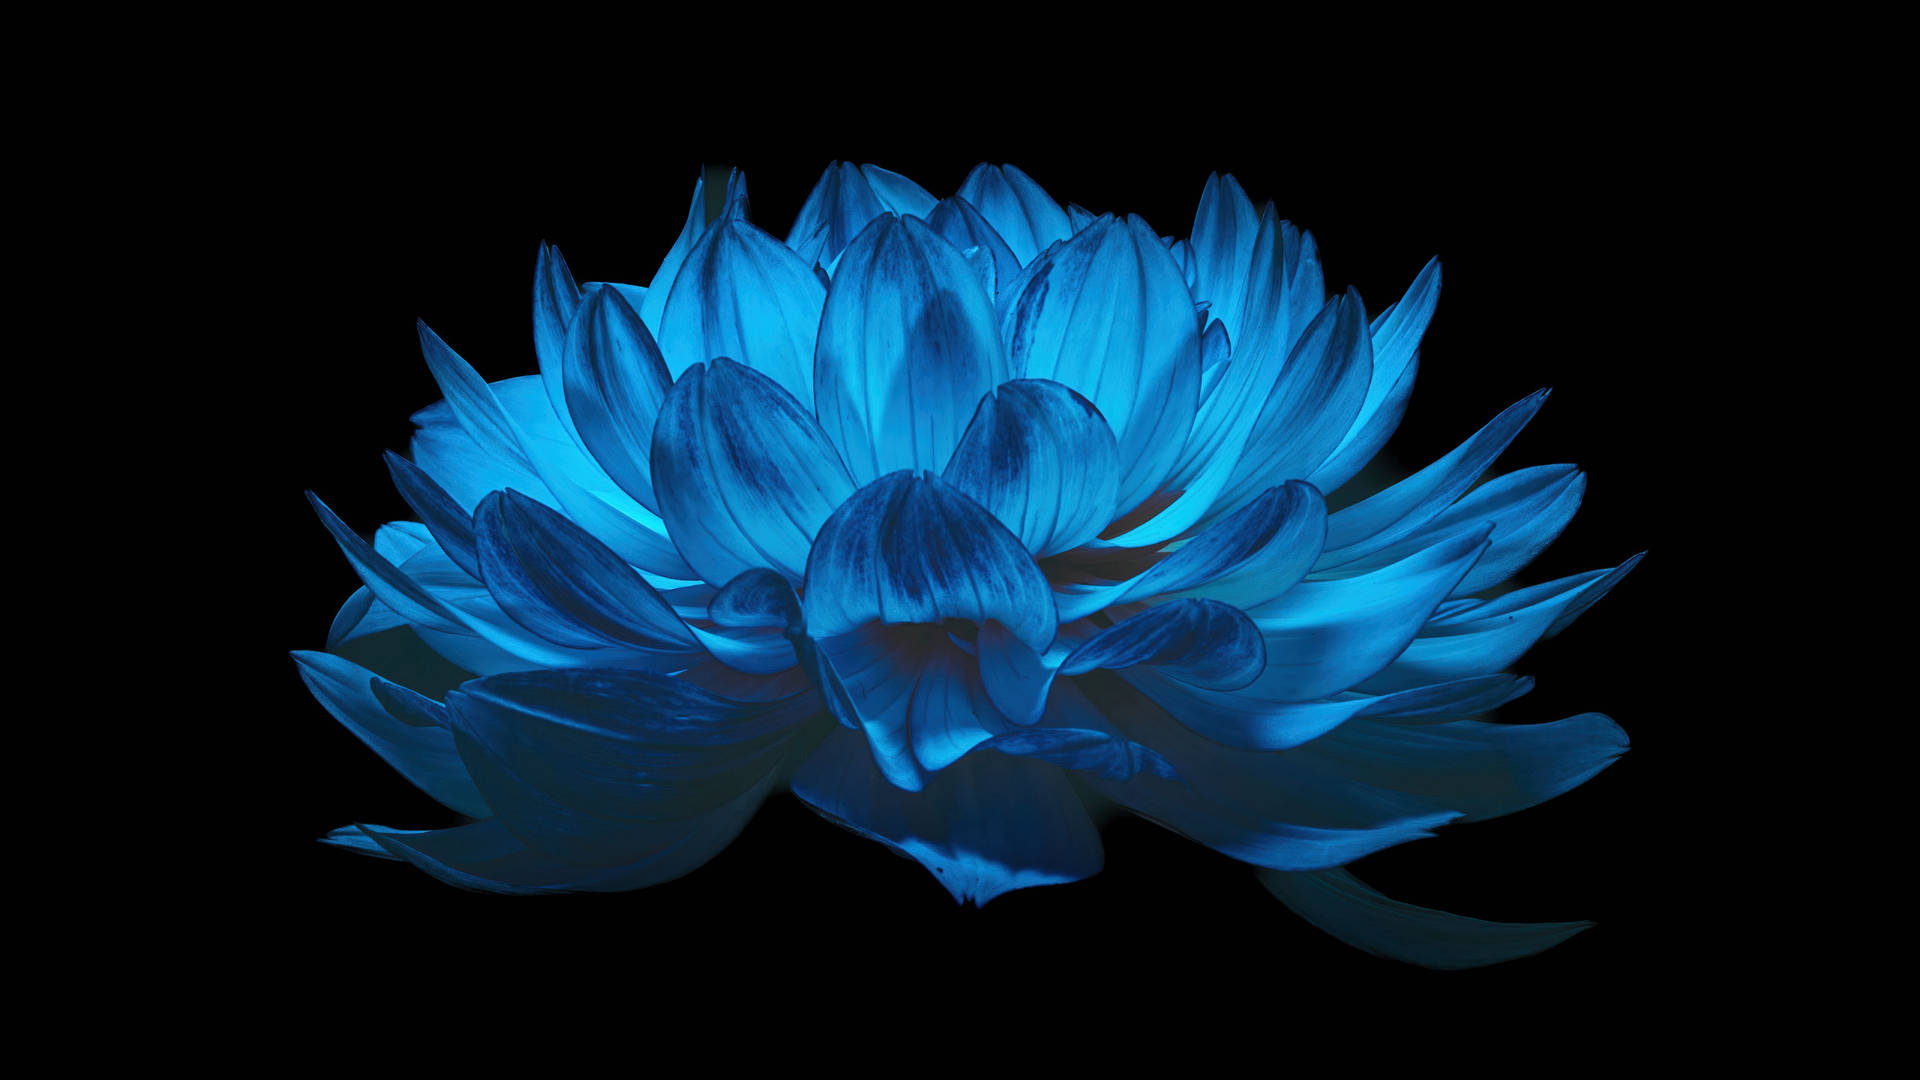 4d Ultra Hd Floating Lotus Flower Picture